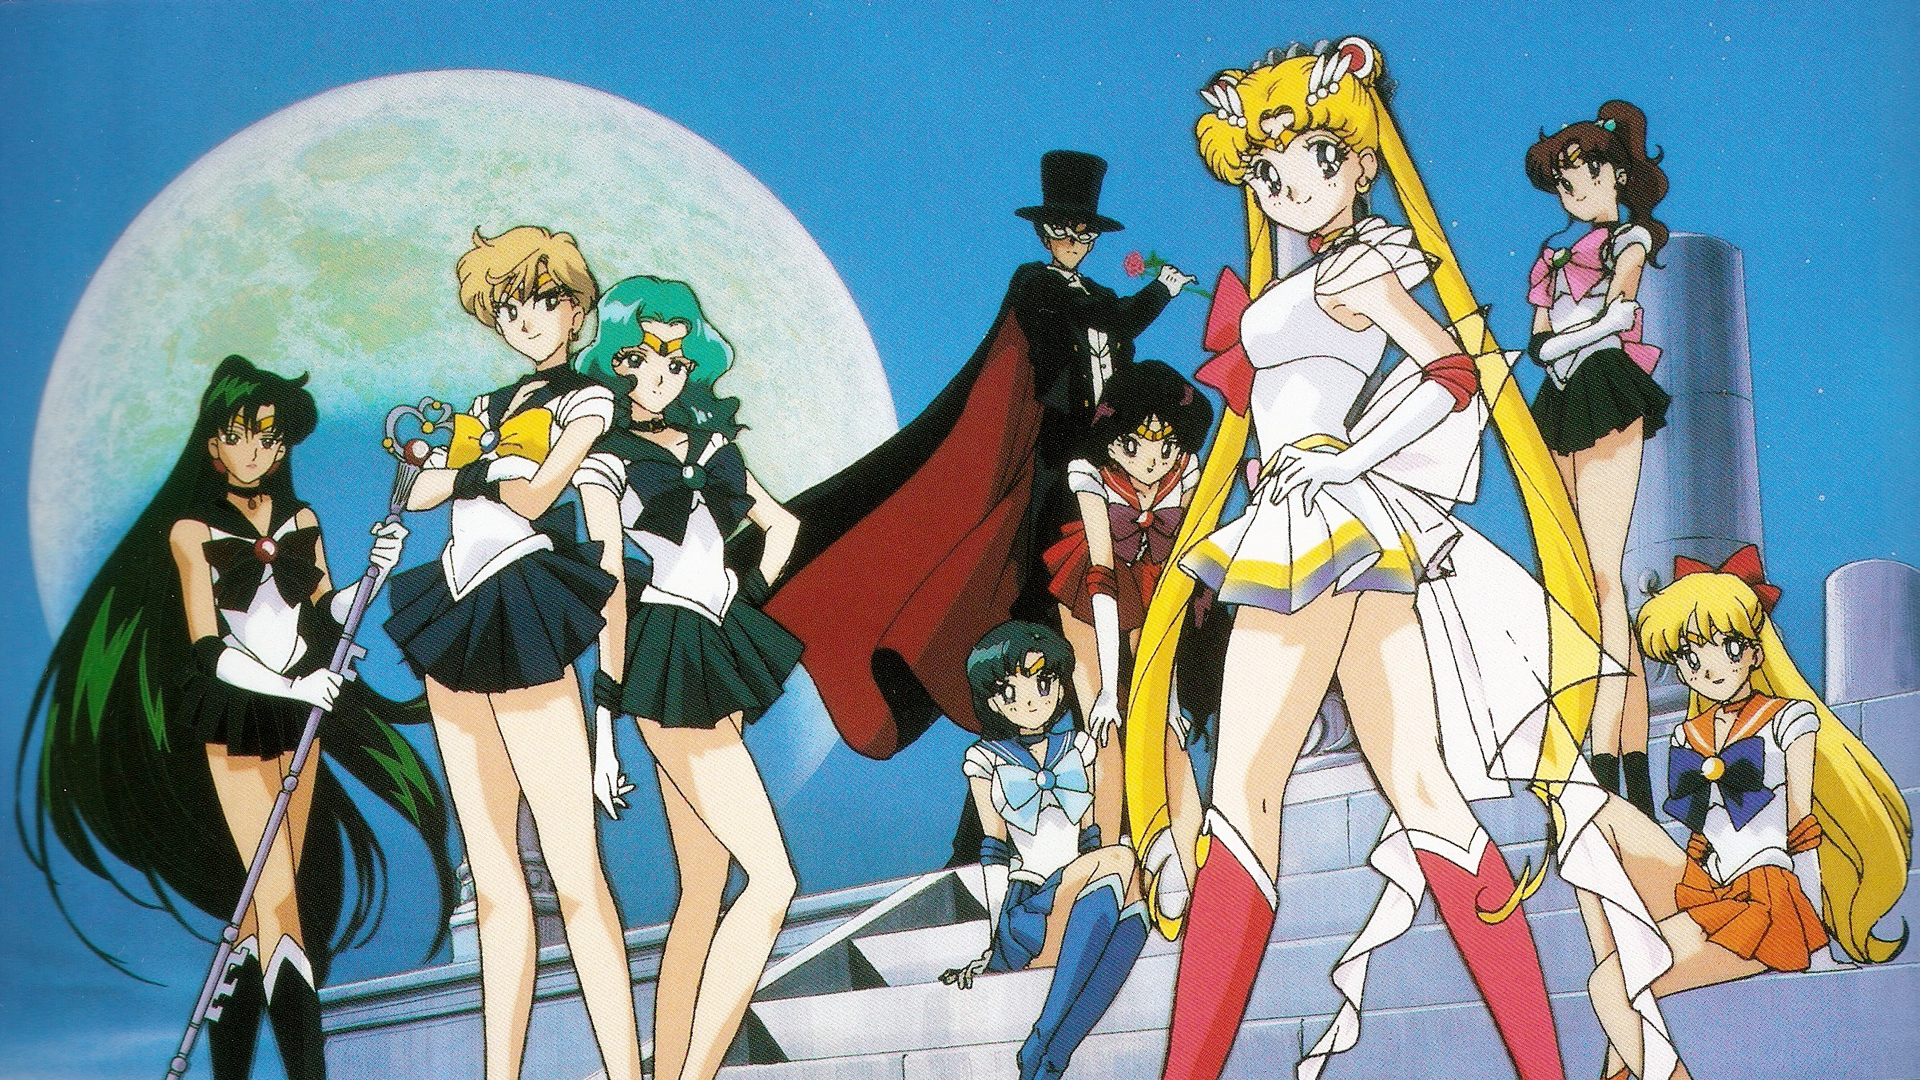 Original or Dubbed? A Breakdown of Anime music dubs in Sailor Moon and Robotech